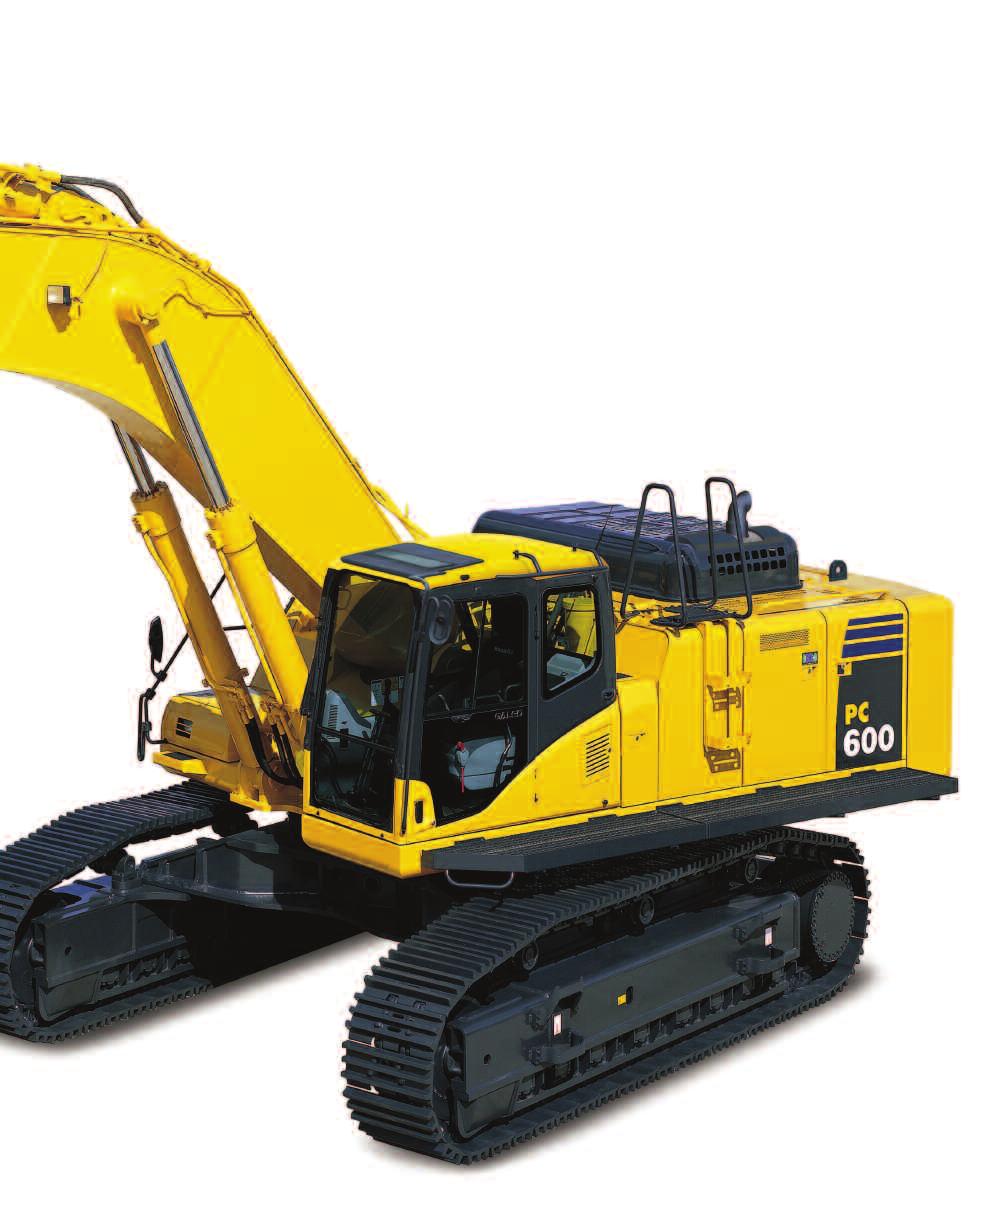 H YDRAULIC E XCAVATOR PC600LC-8 FLYWHEEL HORSEPOWER 320 kw 429 HP @ 1800 rpm Ecology and Economy Features Komatsu SAA6D140E-5 Engine is EPA Tier 3 and EU stage 3A emission certified World s first